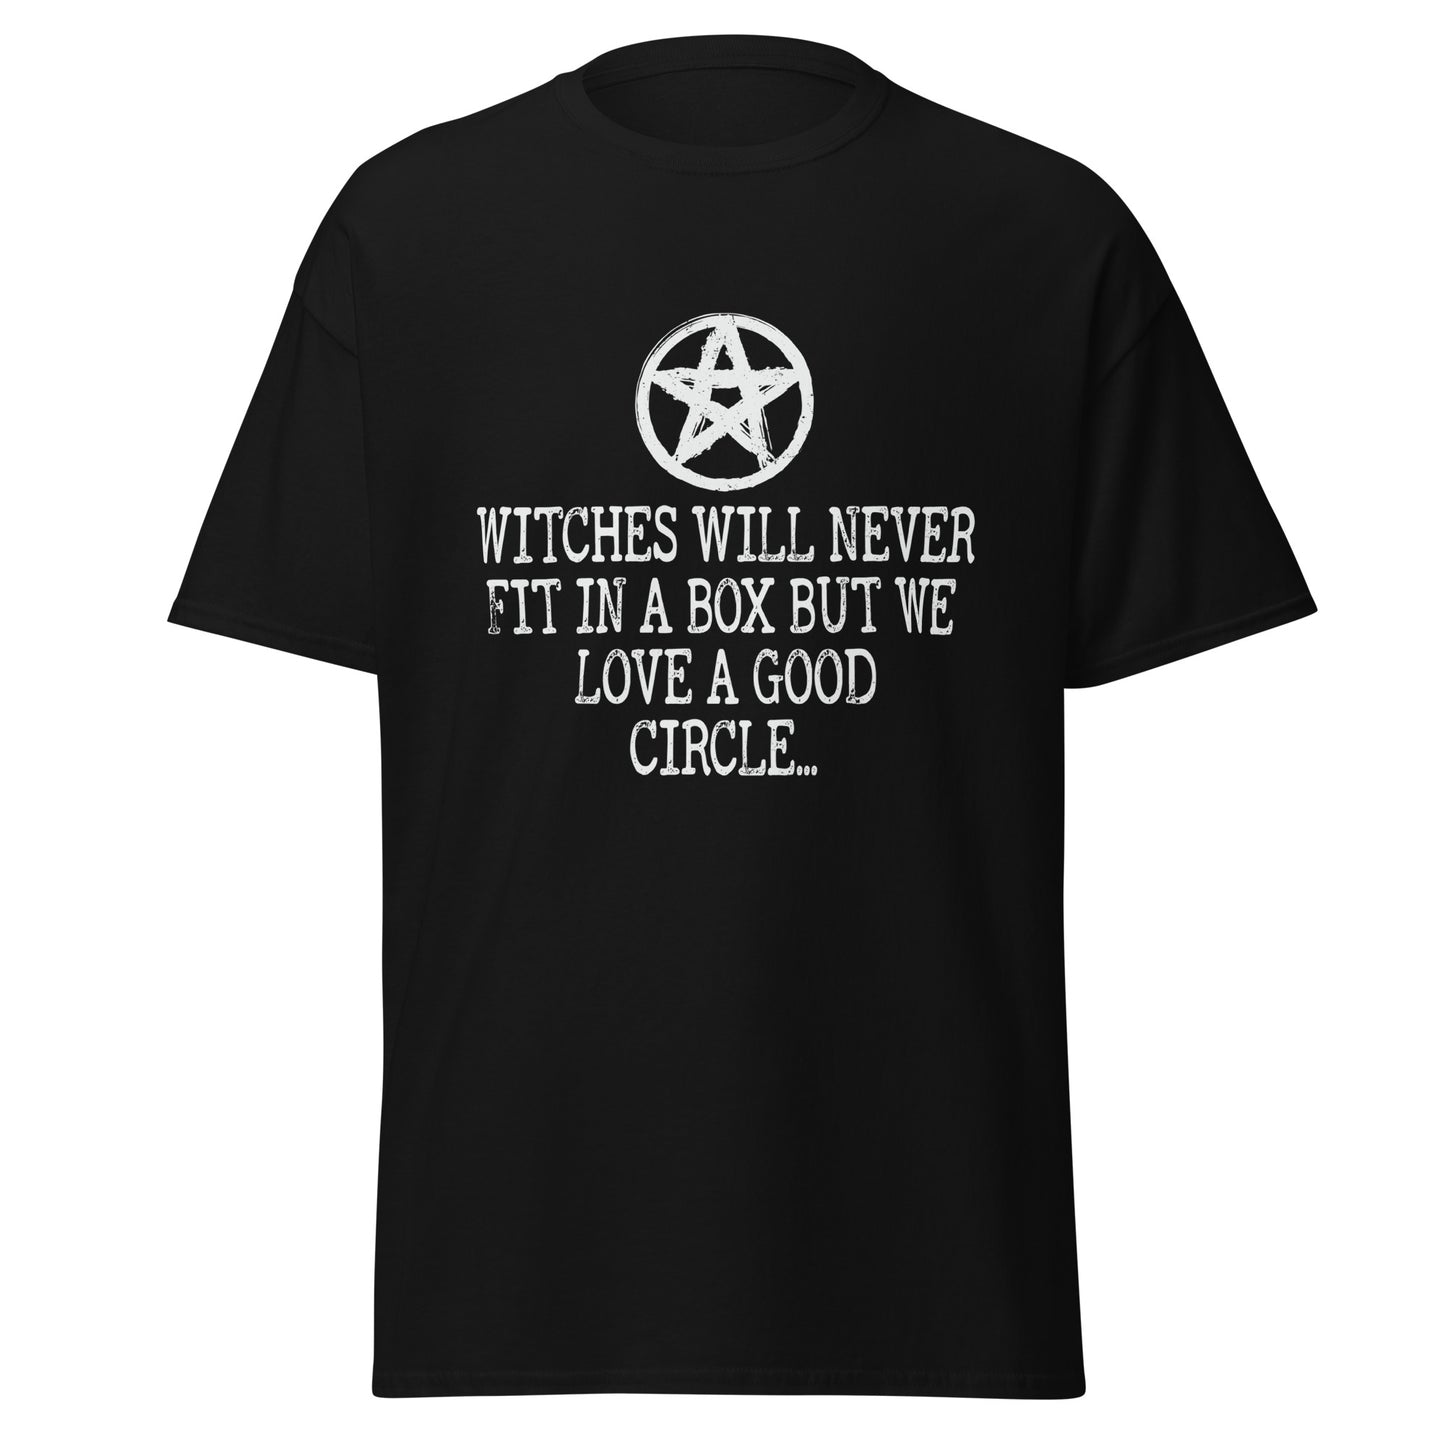 Witches Will Never Fit in Box But We Love A Good Circle , Halloween Design Soft Style Heavy Cotton T-Shirt